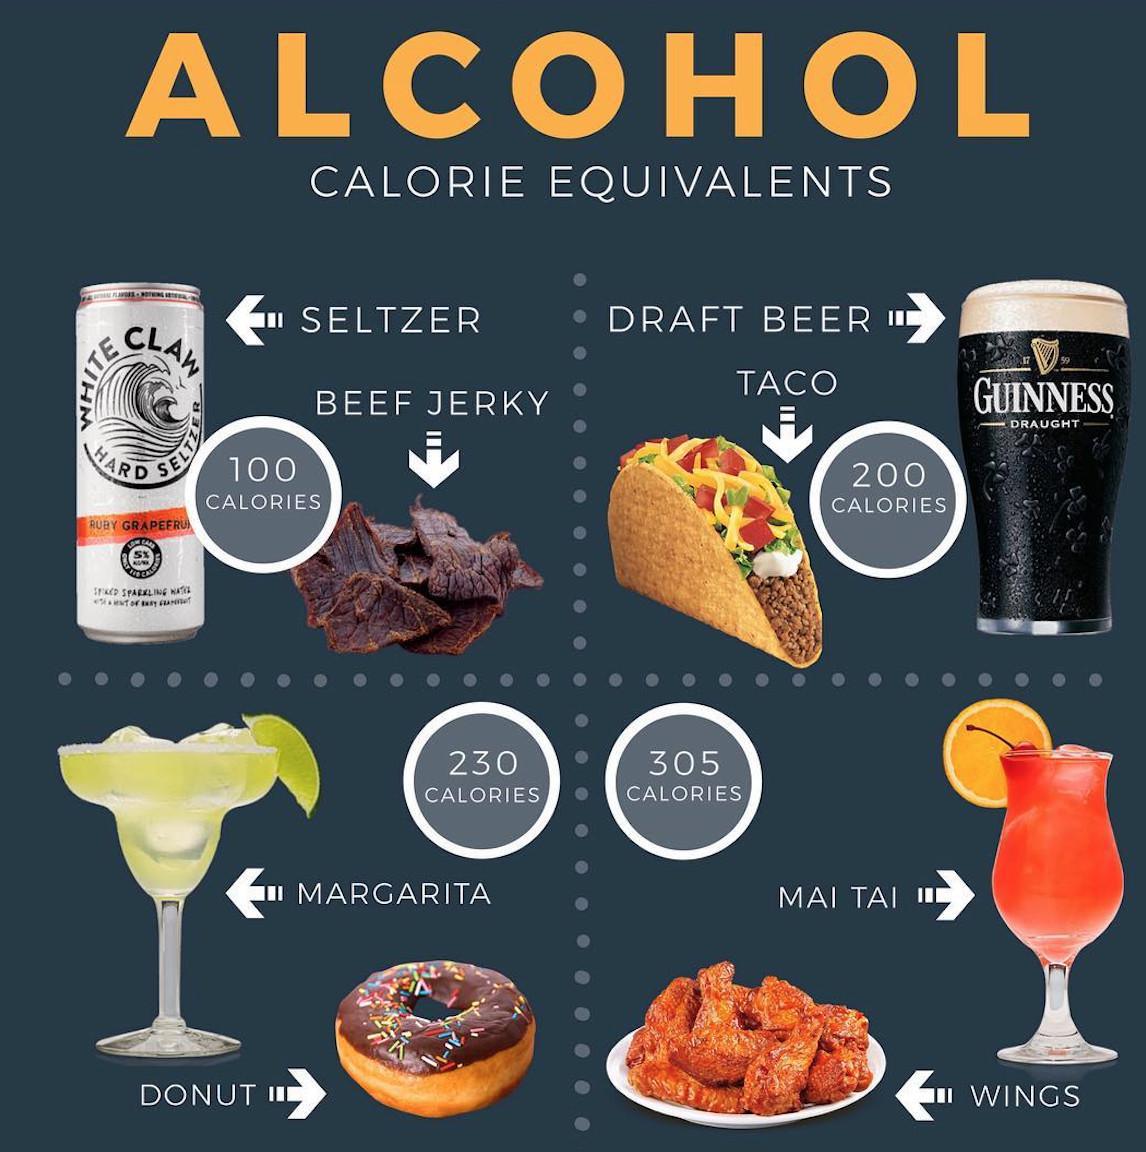 ALCOHOL TIPS & TRACKING